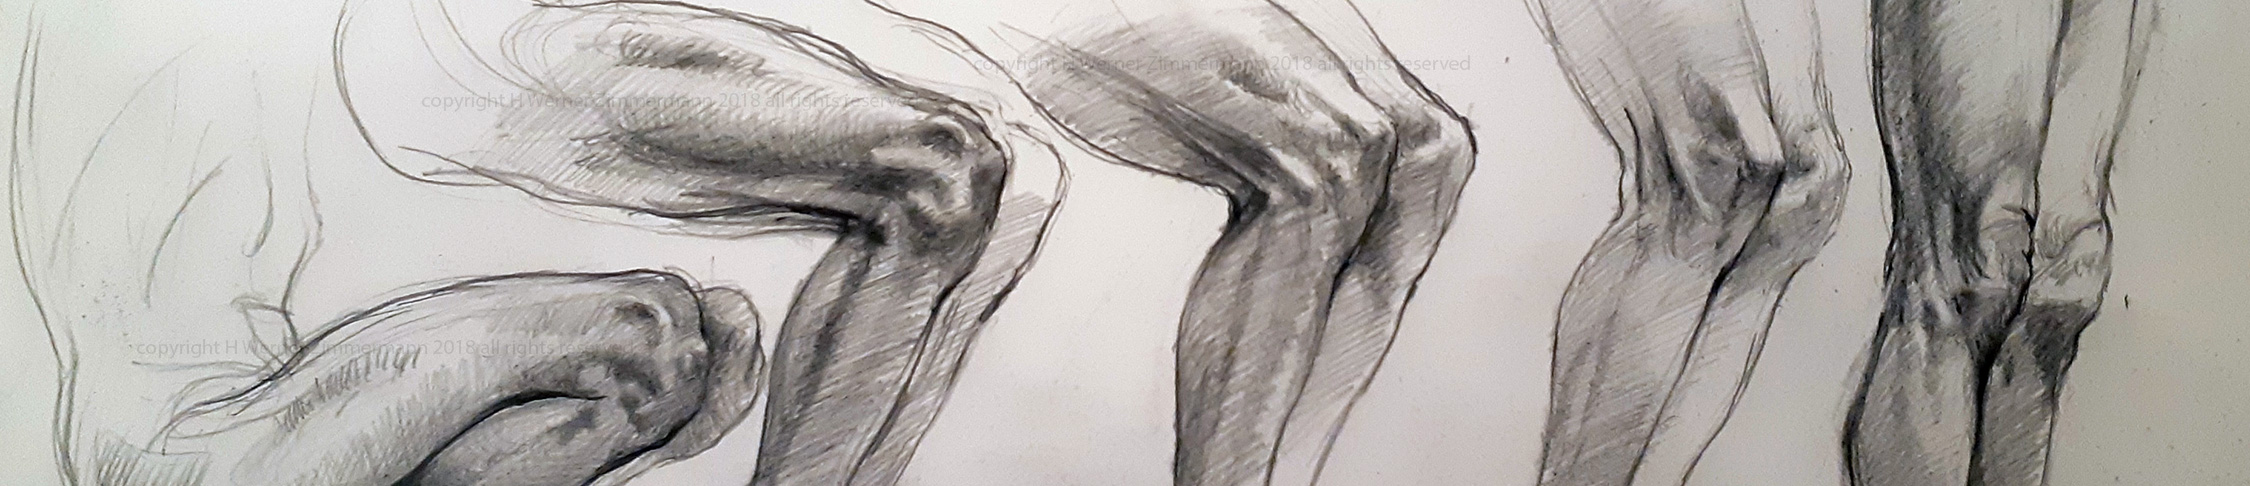 detail of knee sequence